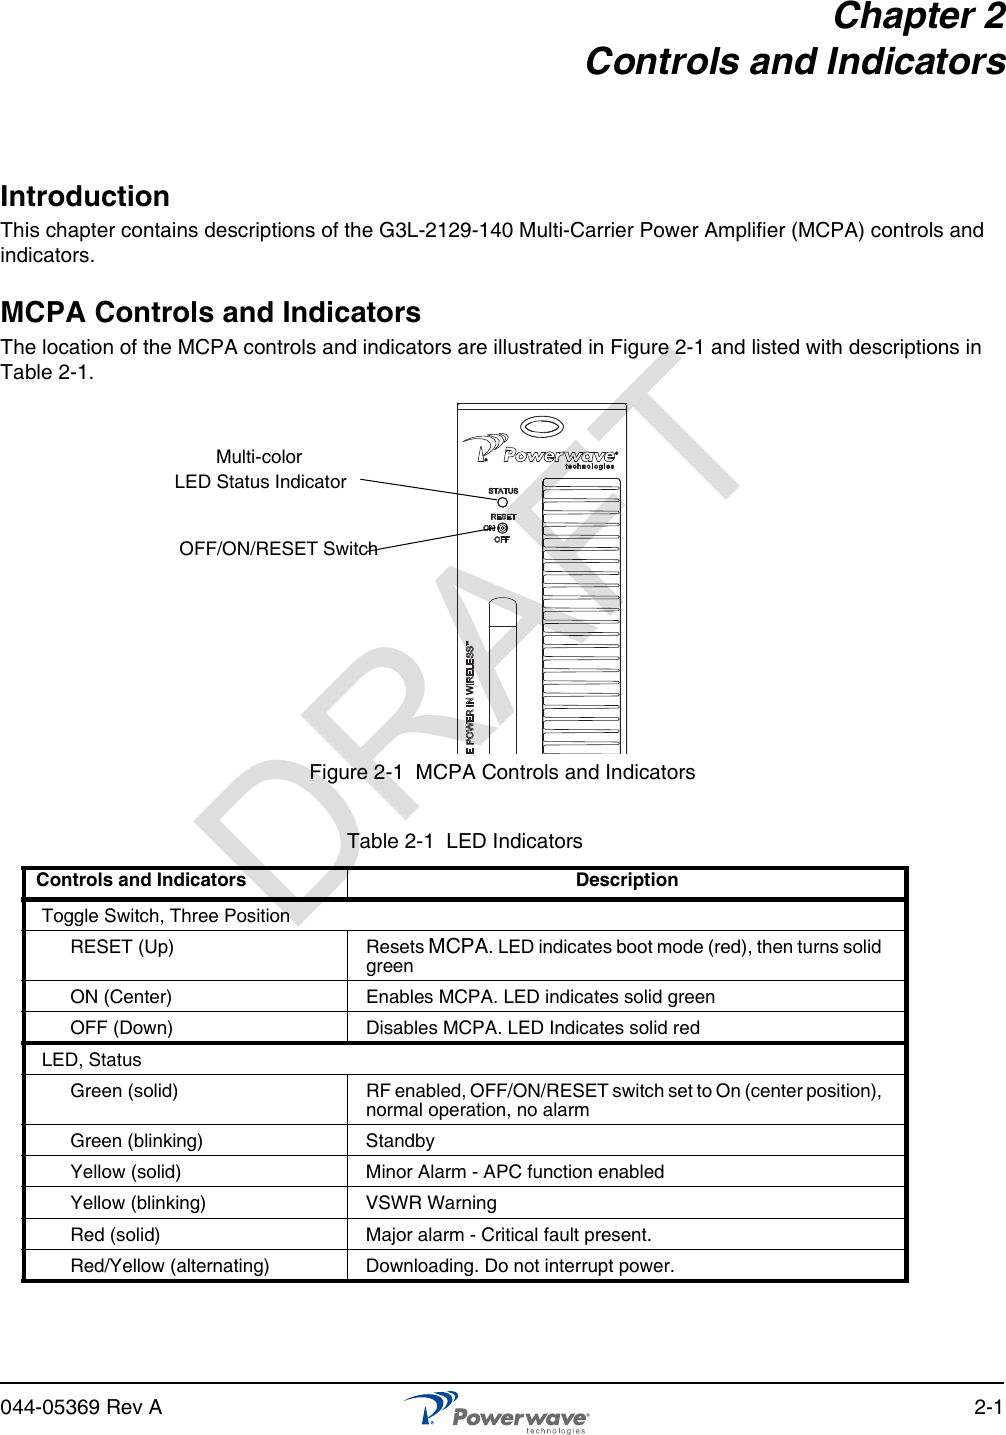 044-05369 Rev A 2-1Chapter 2Controls and IndicatorsIntroductionThis chapter contains descriptions of the G3L-2129-140 Multi-Carrier Power Amplifier (MCPA) controls and indicators.MCPA Controls and IndicatorsThe location of the MCPA controls and indicators are illustrated in Figure 2-1 and listed with descriptions in Table 2-1.Figure 2-1  MCPA Controls and IndicatorsTable 2-1  LED Indicators Controls and Indicators DescriptionToggle Switch, Three PositionRESET (Up) Resets MCPA. LED indicates boot mode (red), then turns solid greenON (Center) Enables MCPA. LED indicates solid greenOFF (Down) Disables MCPA. LED Indicates solid redLED, StatusGreen (solid) RF enabled, OFF/ON/RESET switch set to On (center position), normal operation, no alarmGreen (blinking) StandbyYellow (solid) Minor Alarm - APC function enabledYellow (blinking) VSWR WarningRed (solid) Major alarm - Critical fault present.Red/Yellow (alternating) Downloading. Do not interrupt power. Multi-colorOFF/ON/RESET SwitchLED Status Indicator DRAFT